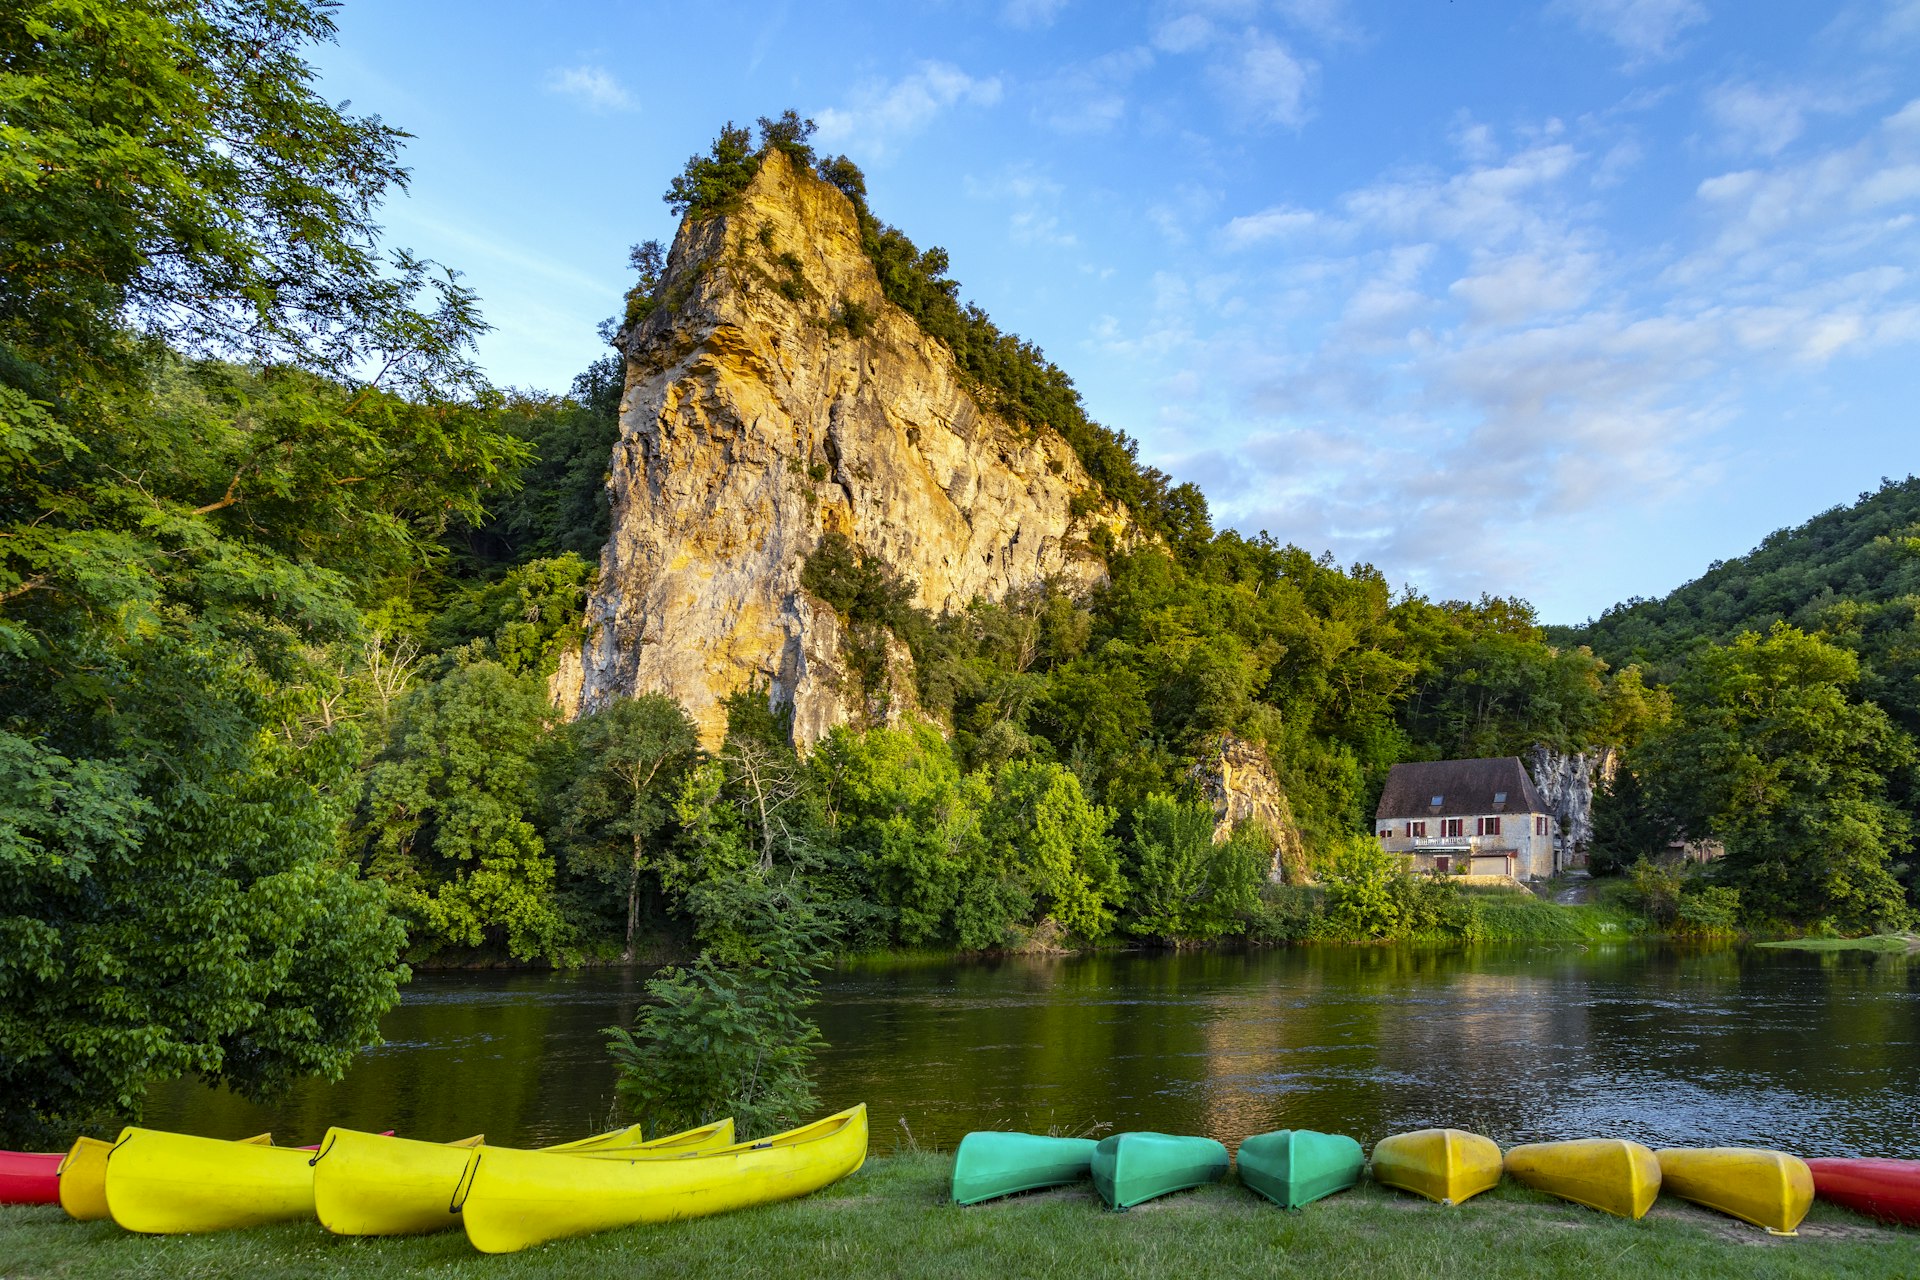 Late afternoon sunshine on the Dordogne River in the Nouvelle-Aquitaine region, France